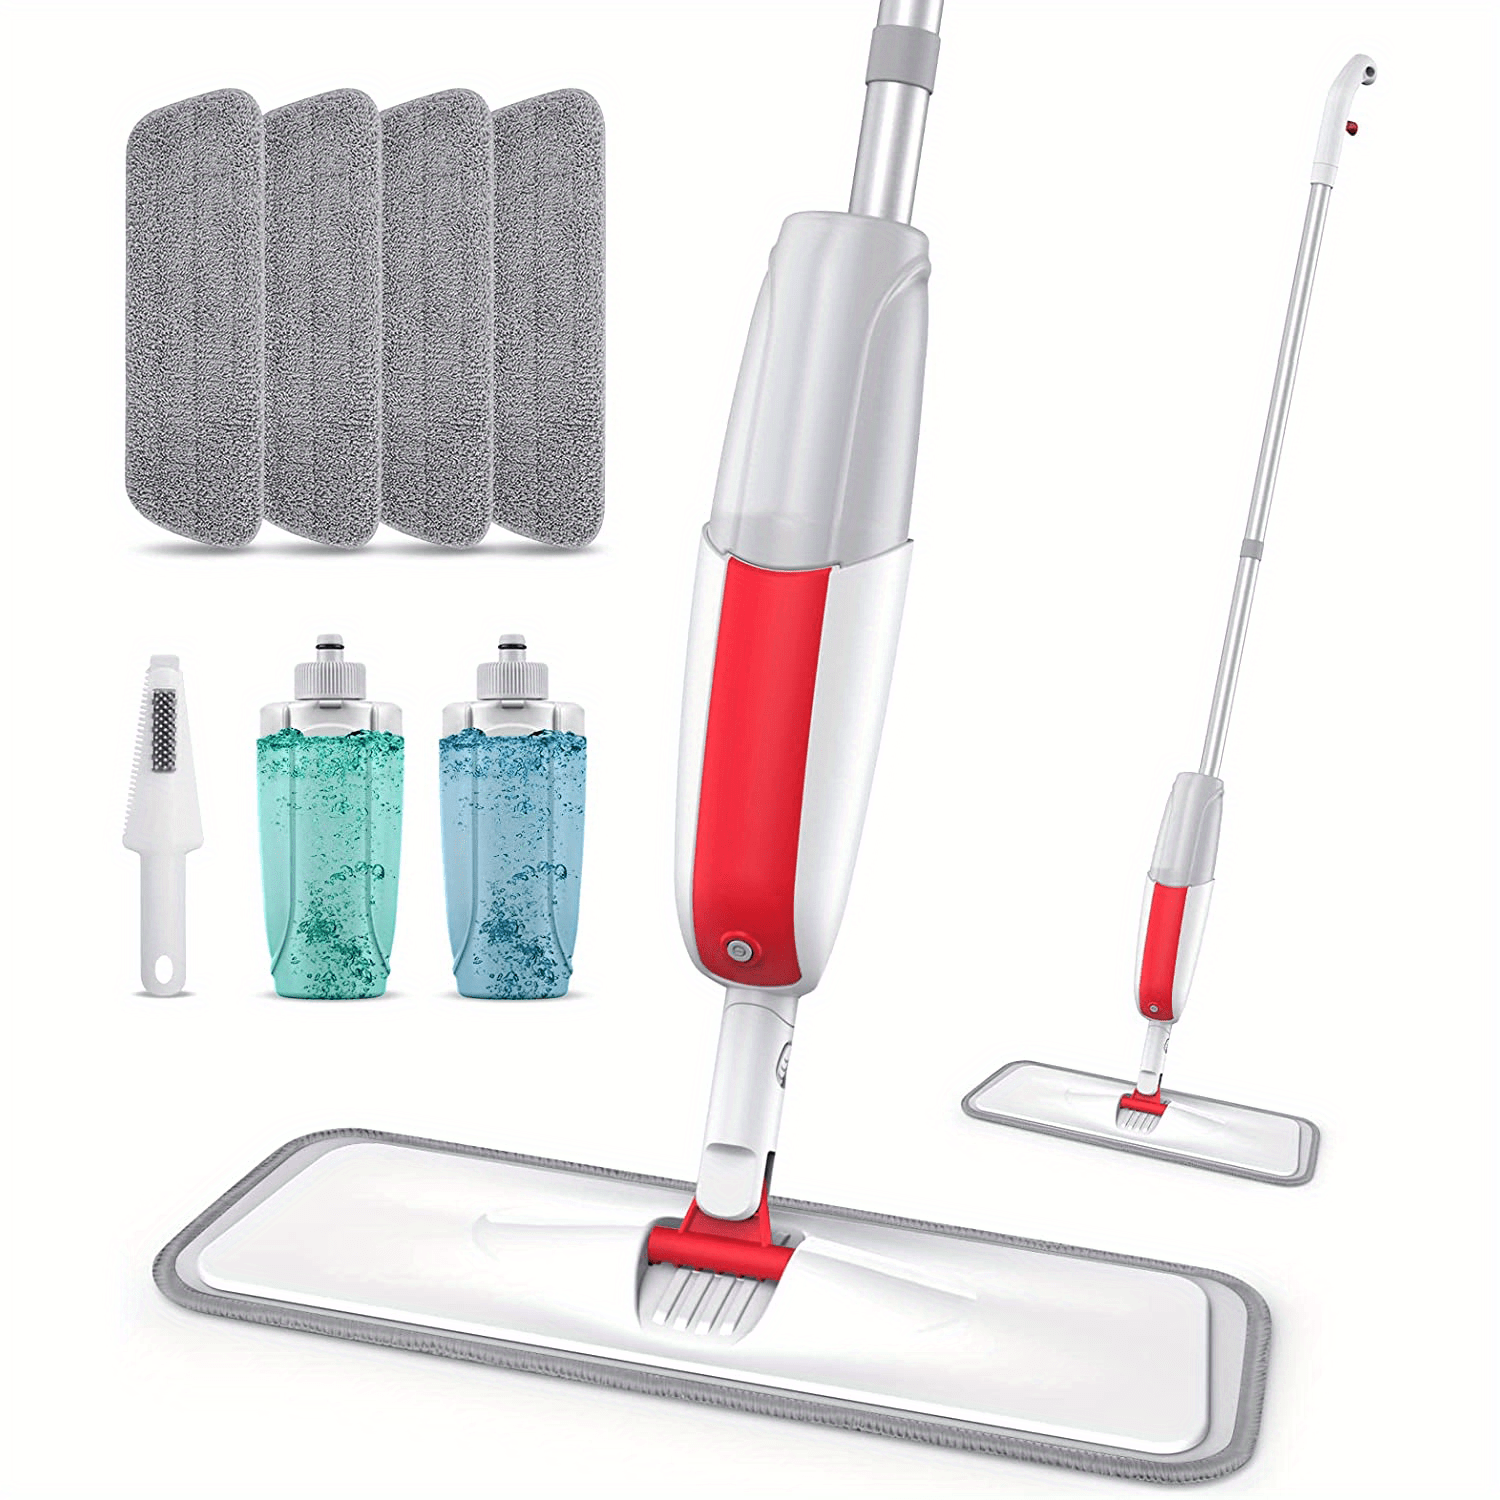 Spray Mop for Floor Cleaning - Microfiber Wet Floor Mop with 3 Washable  Pads and Refillable Bottle, Flat Mop with Sprayer for Kitchen Wood Hardwood